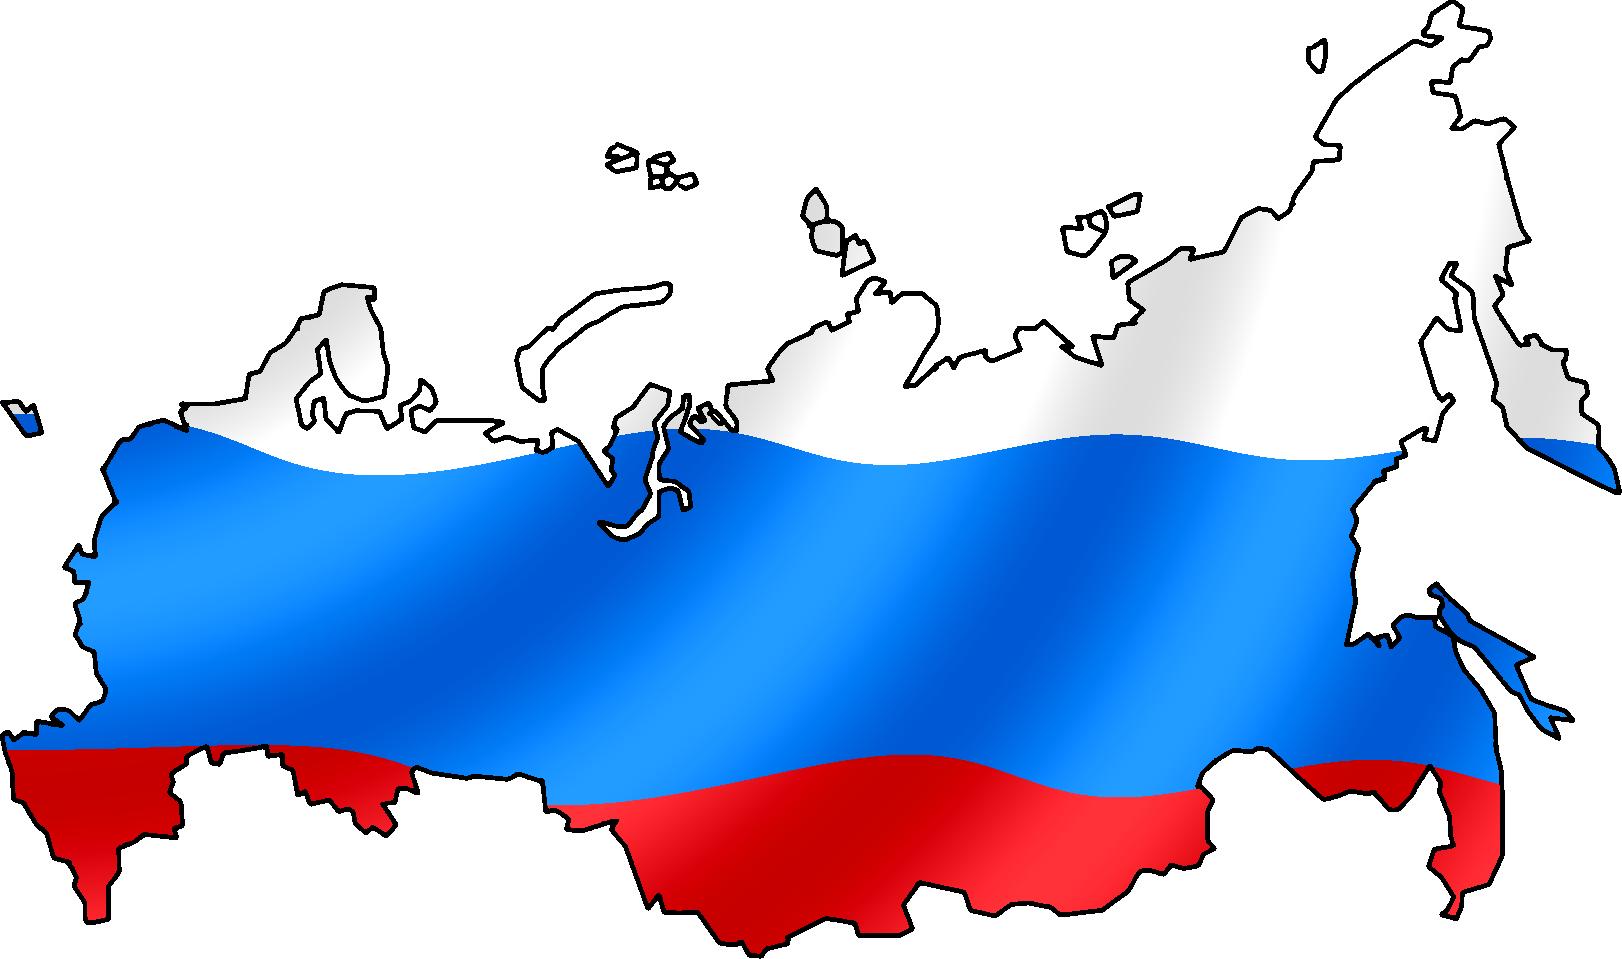 Flag Russia  Download the National Russian flag